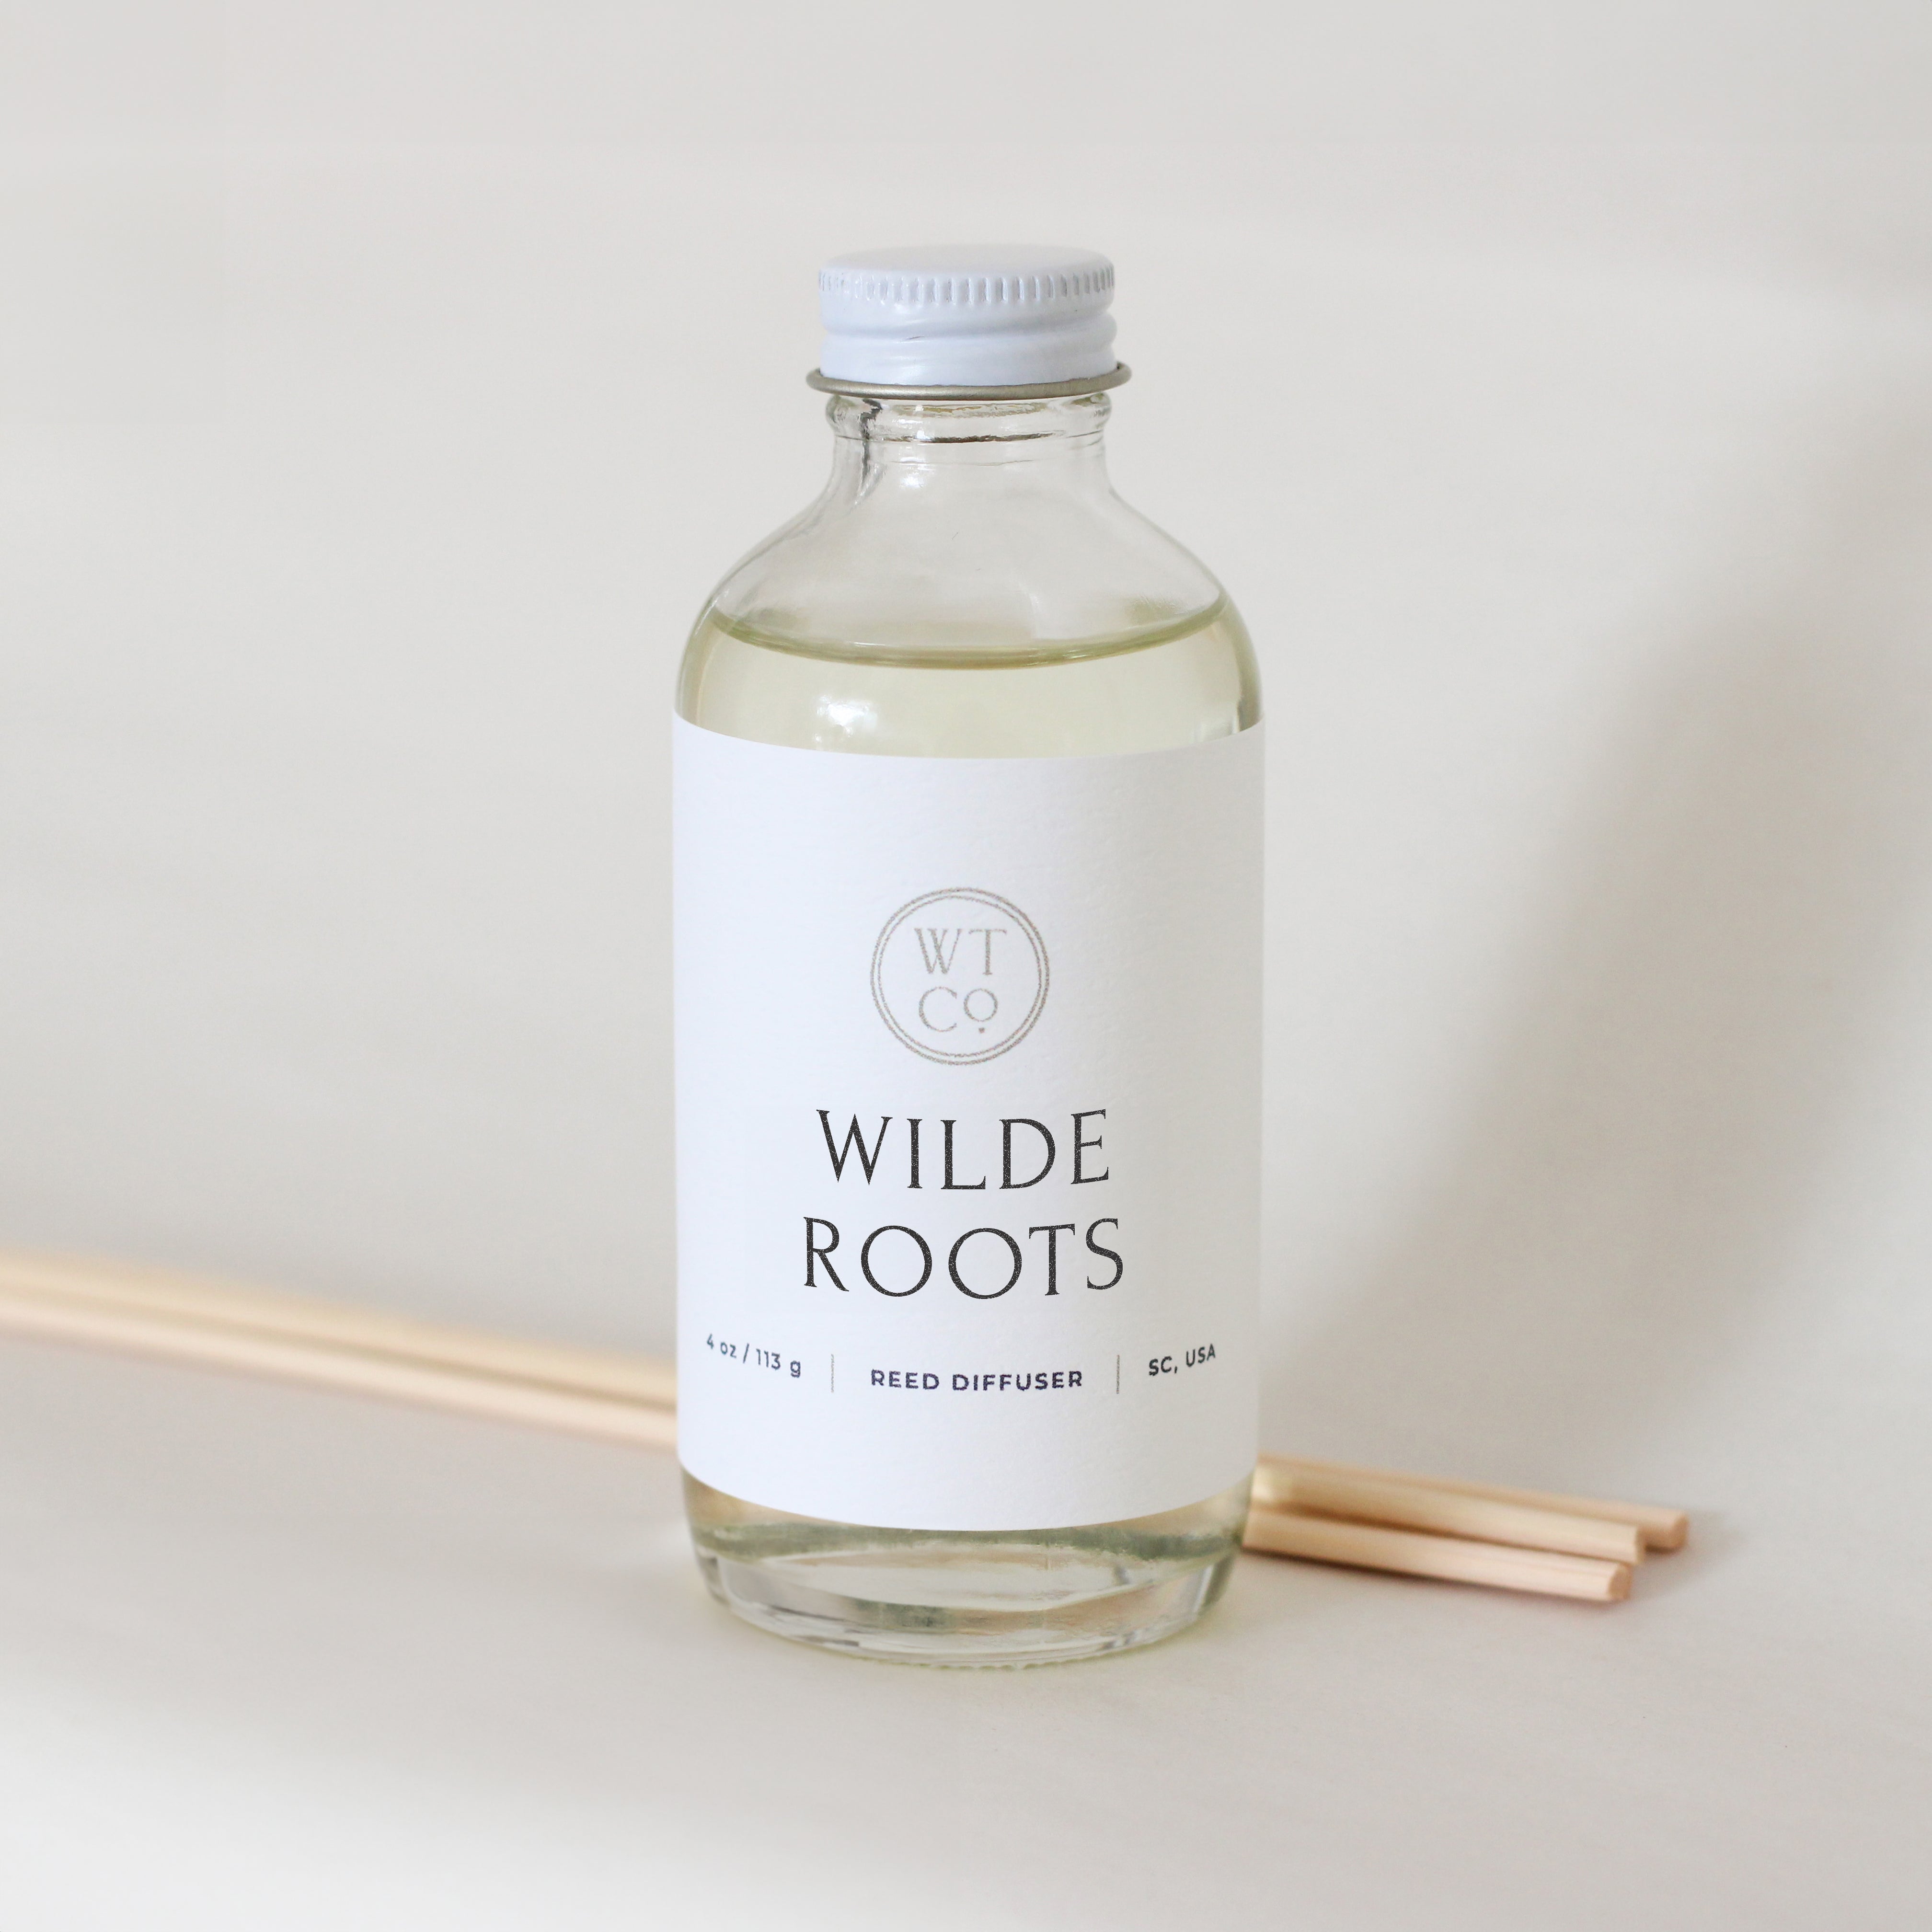 Wilde Roots Reed Diffuser | Well-Taylored Co.